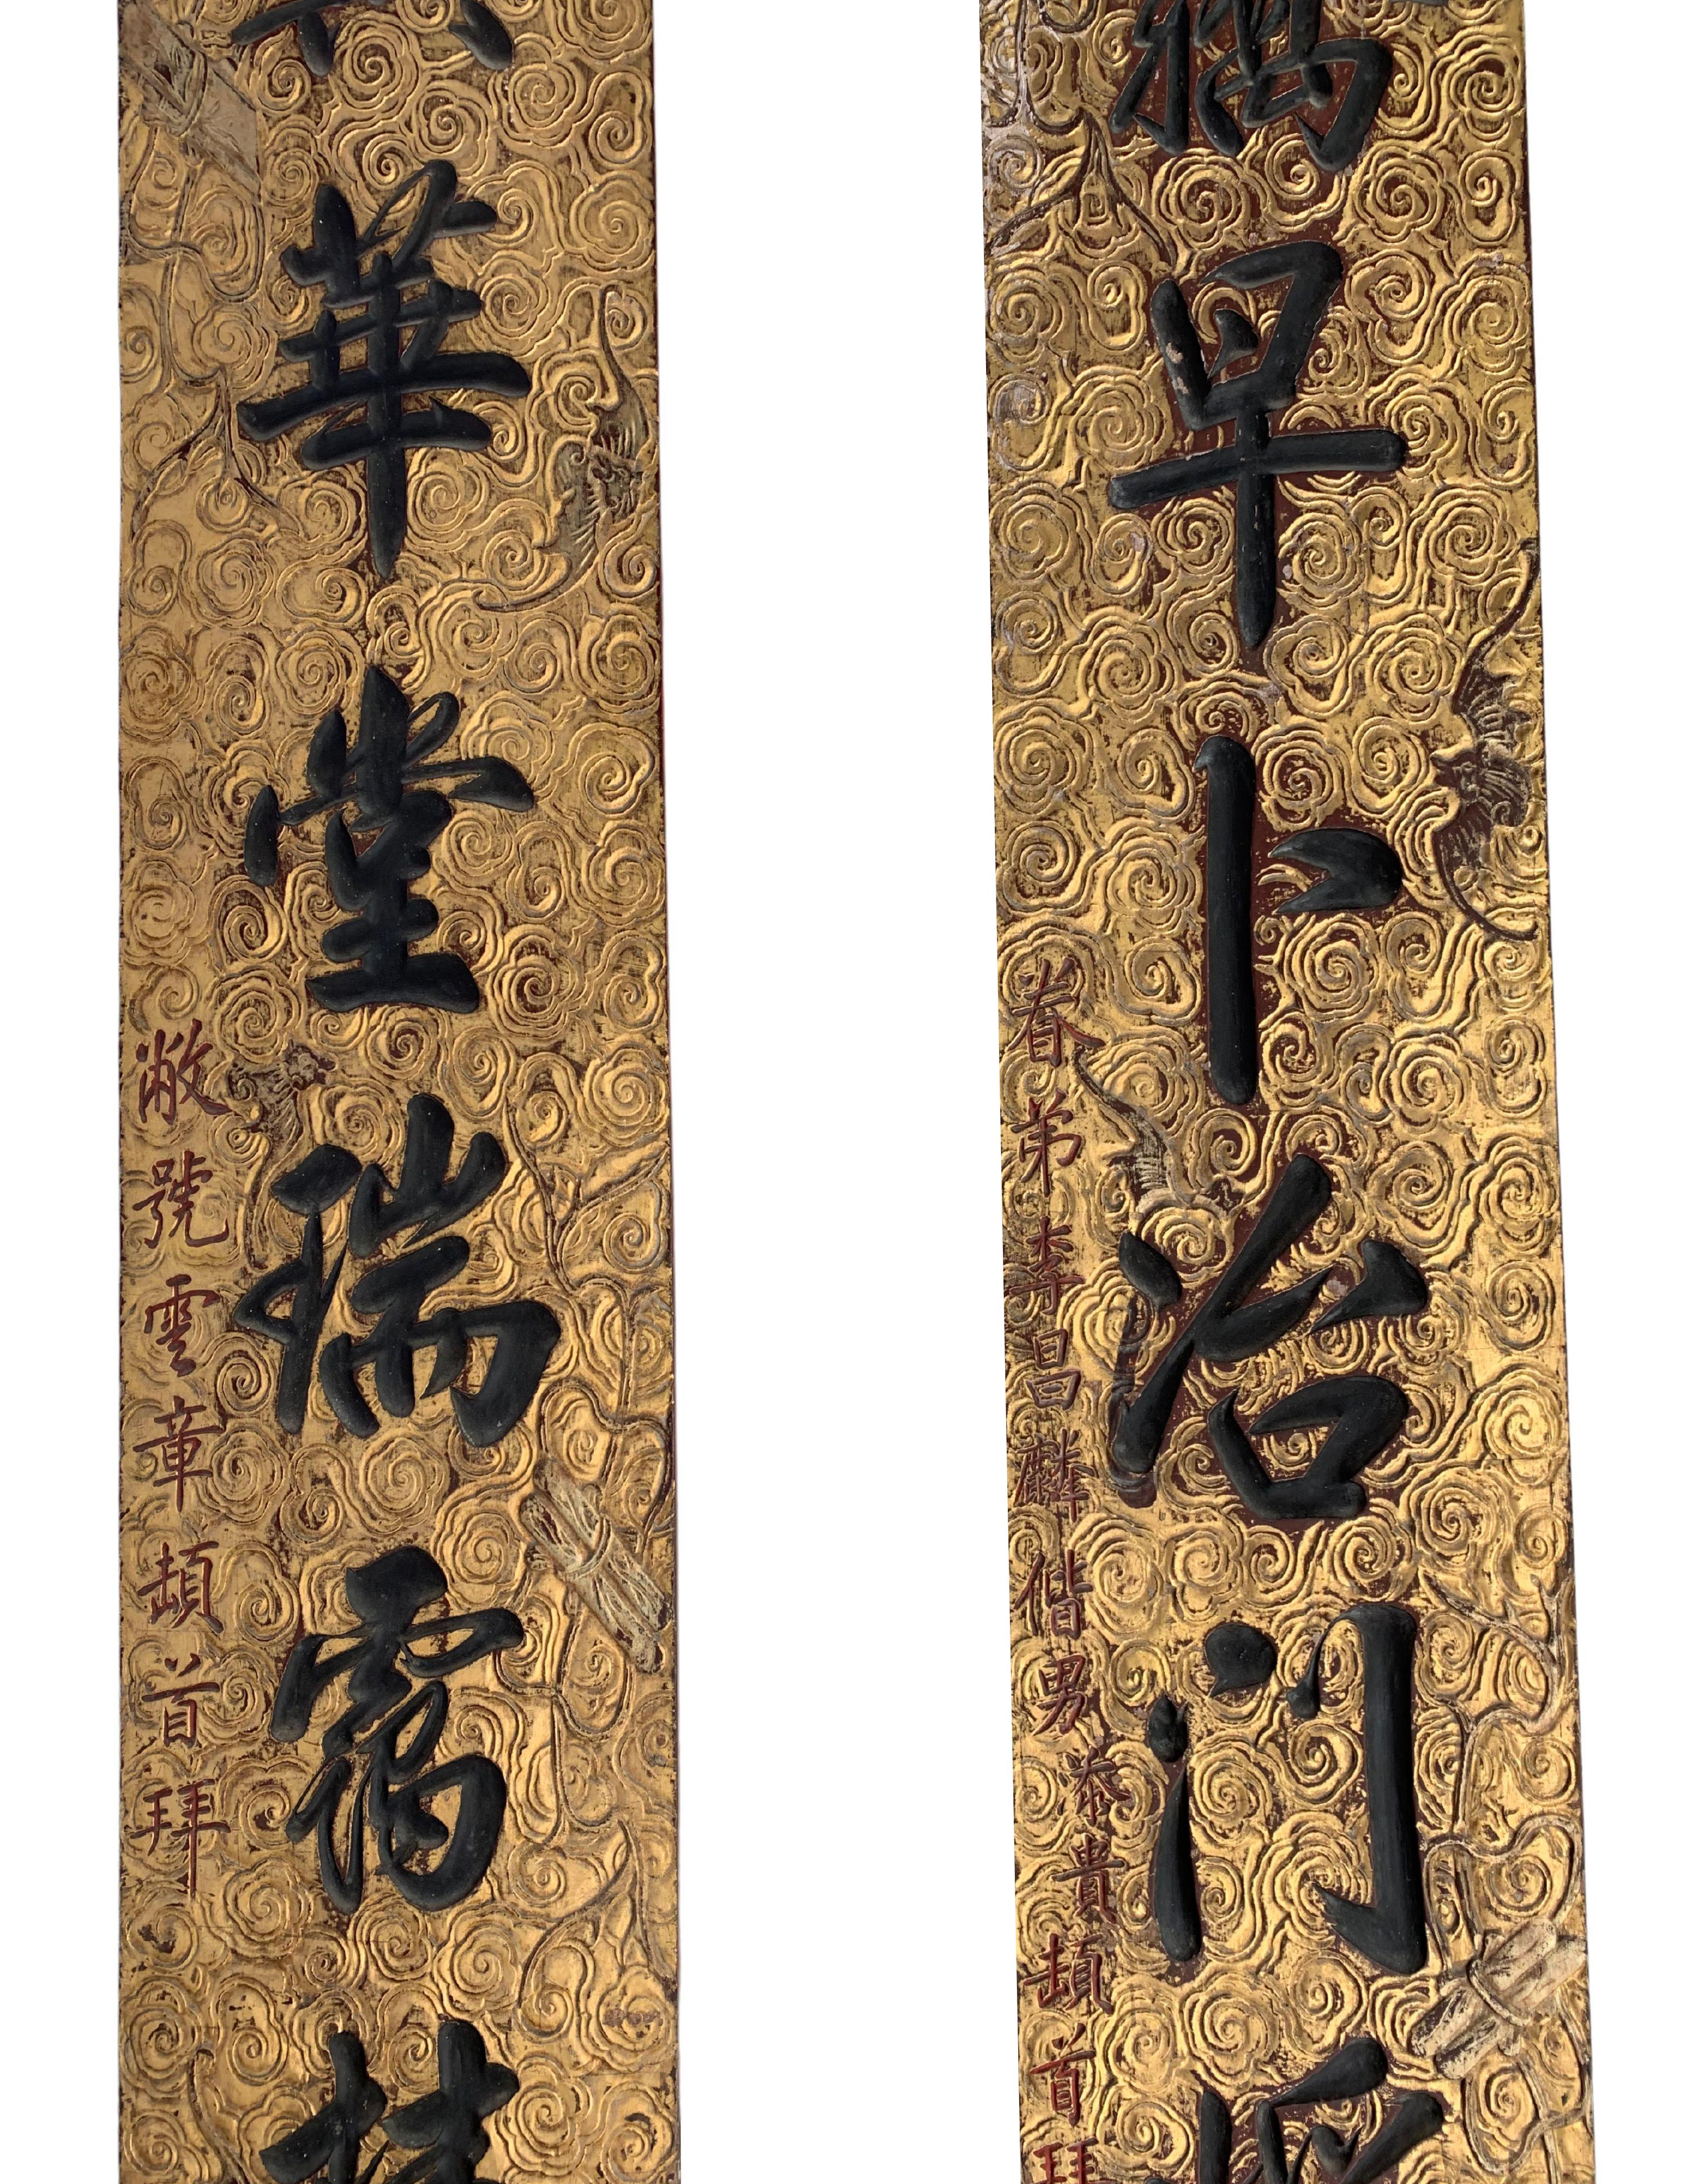 Hand-Crafted Large Chinese Signboard Gilded Pair with Calligraphy, C. 1900